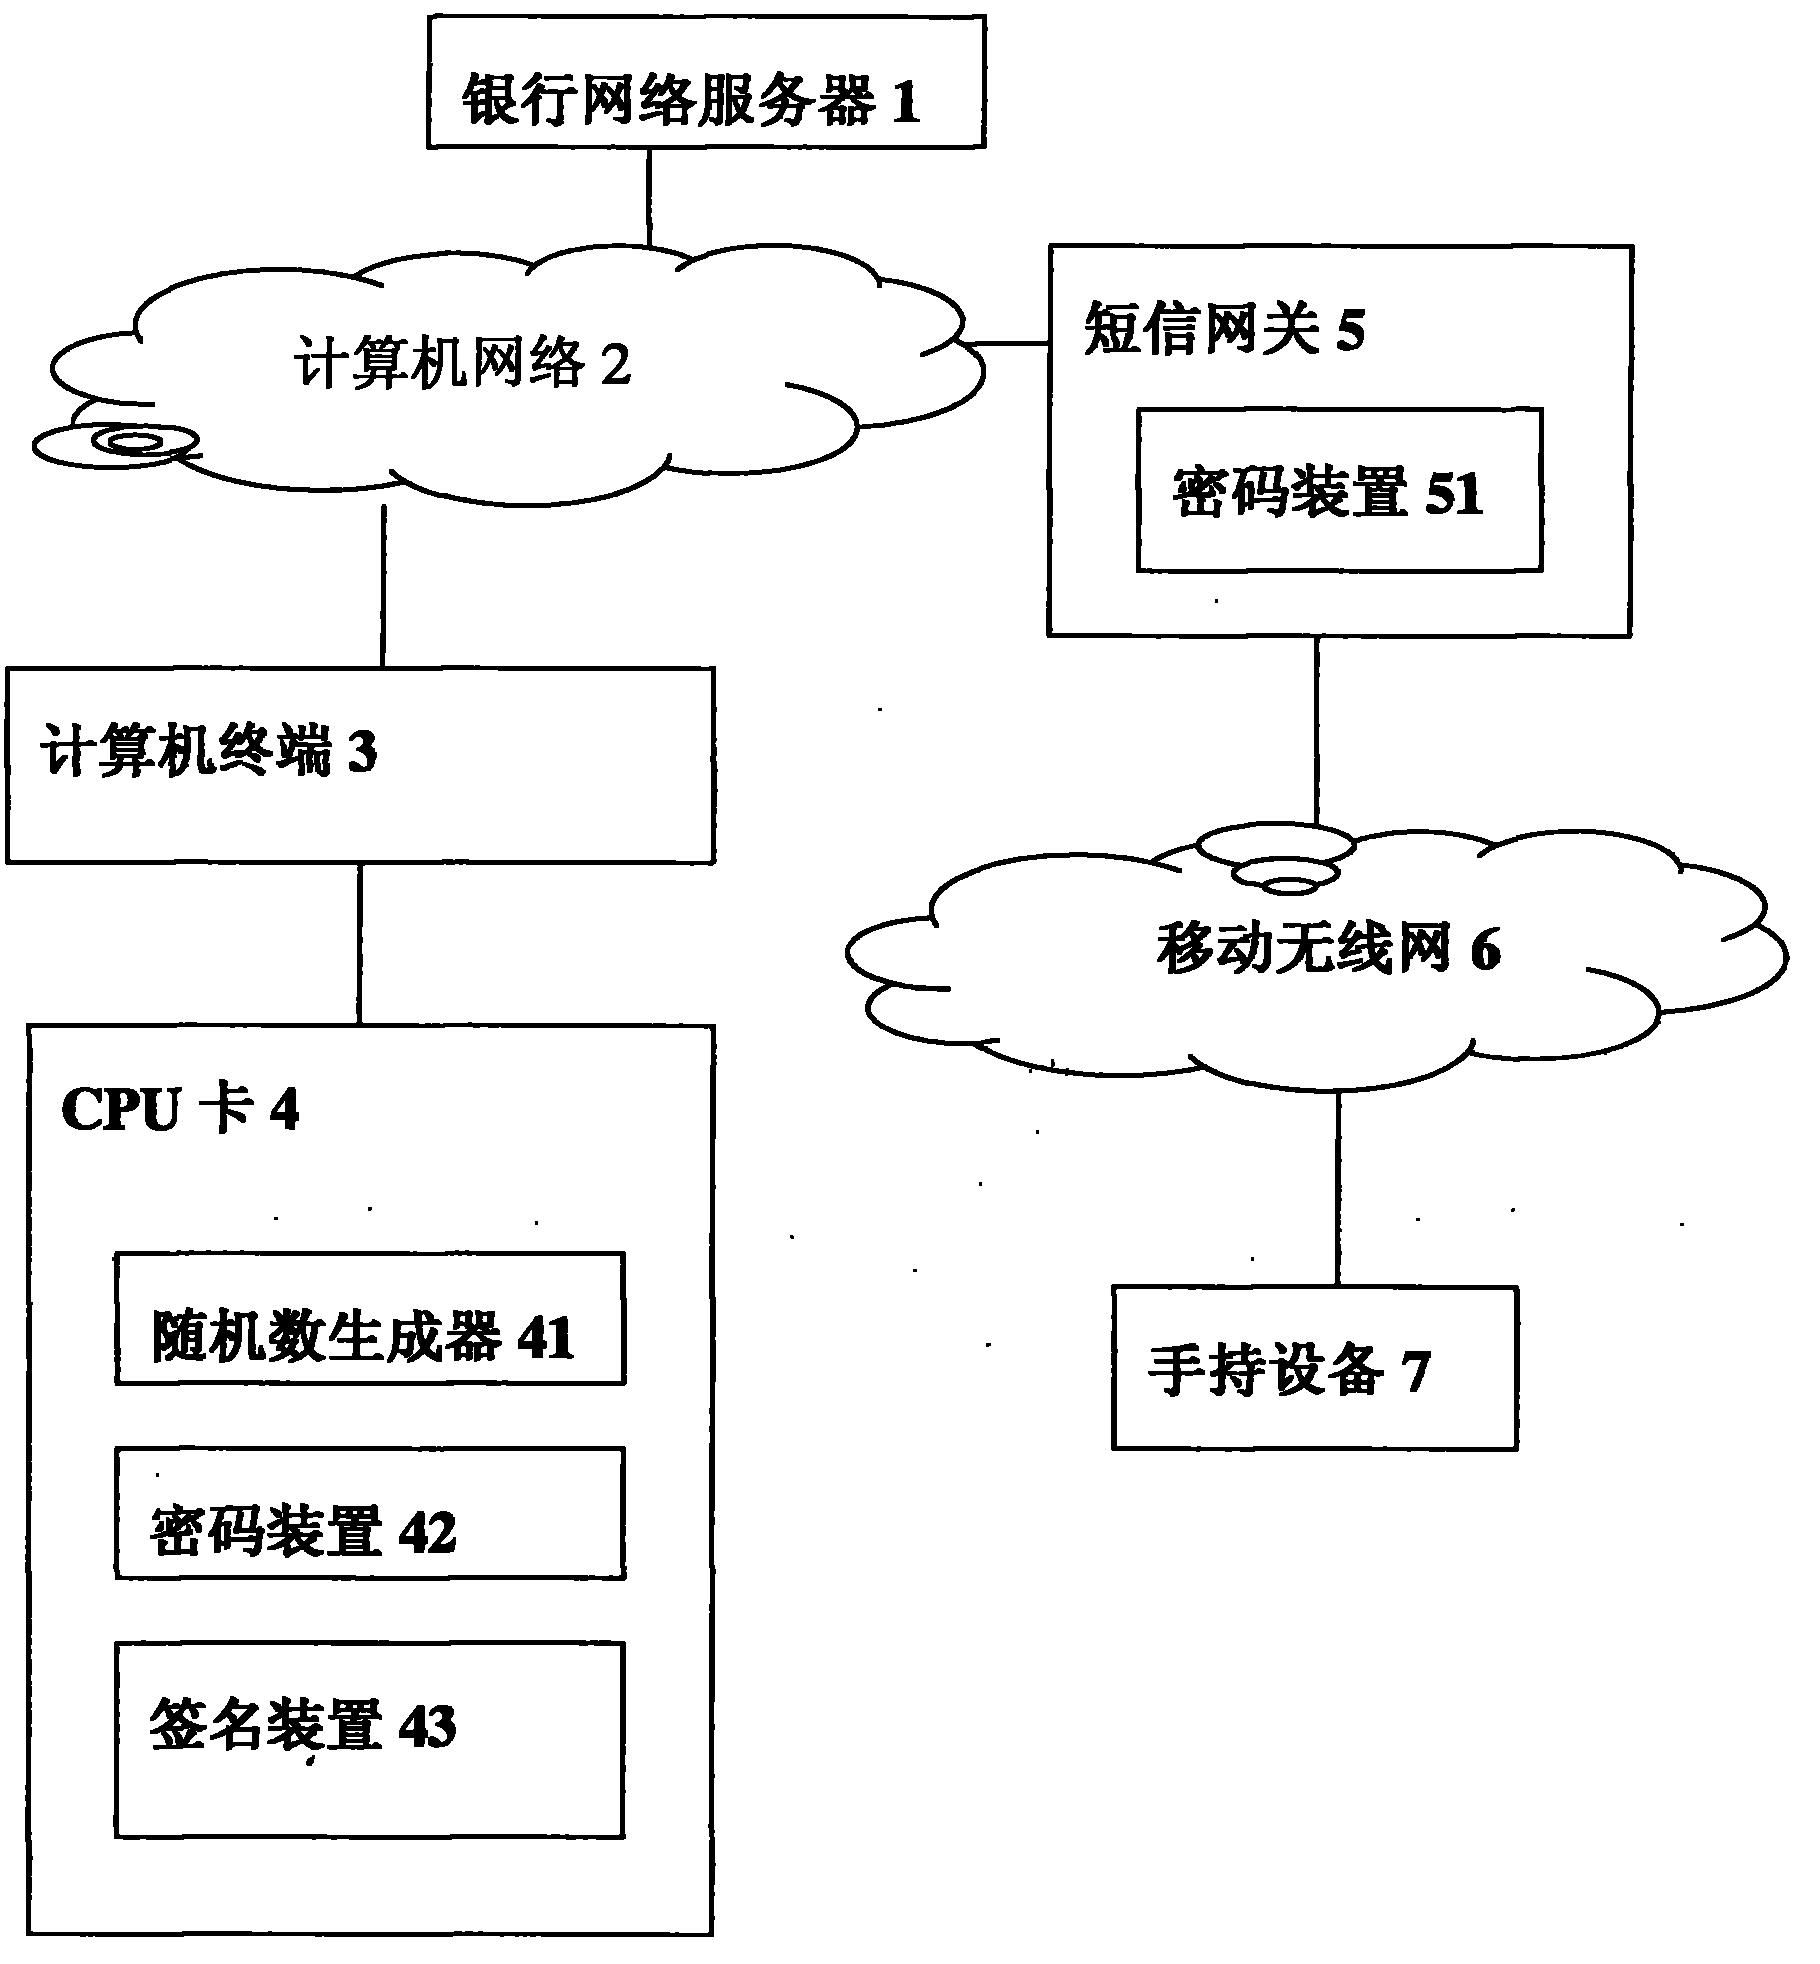 Method for confirming data in CPU (Central Processing Unit) card